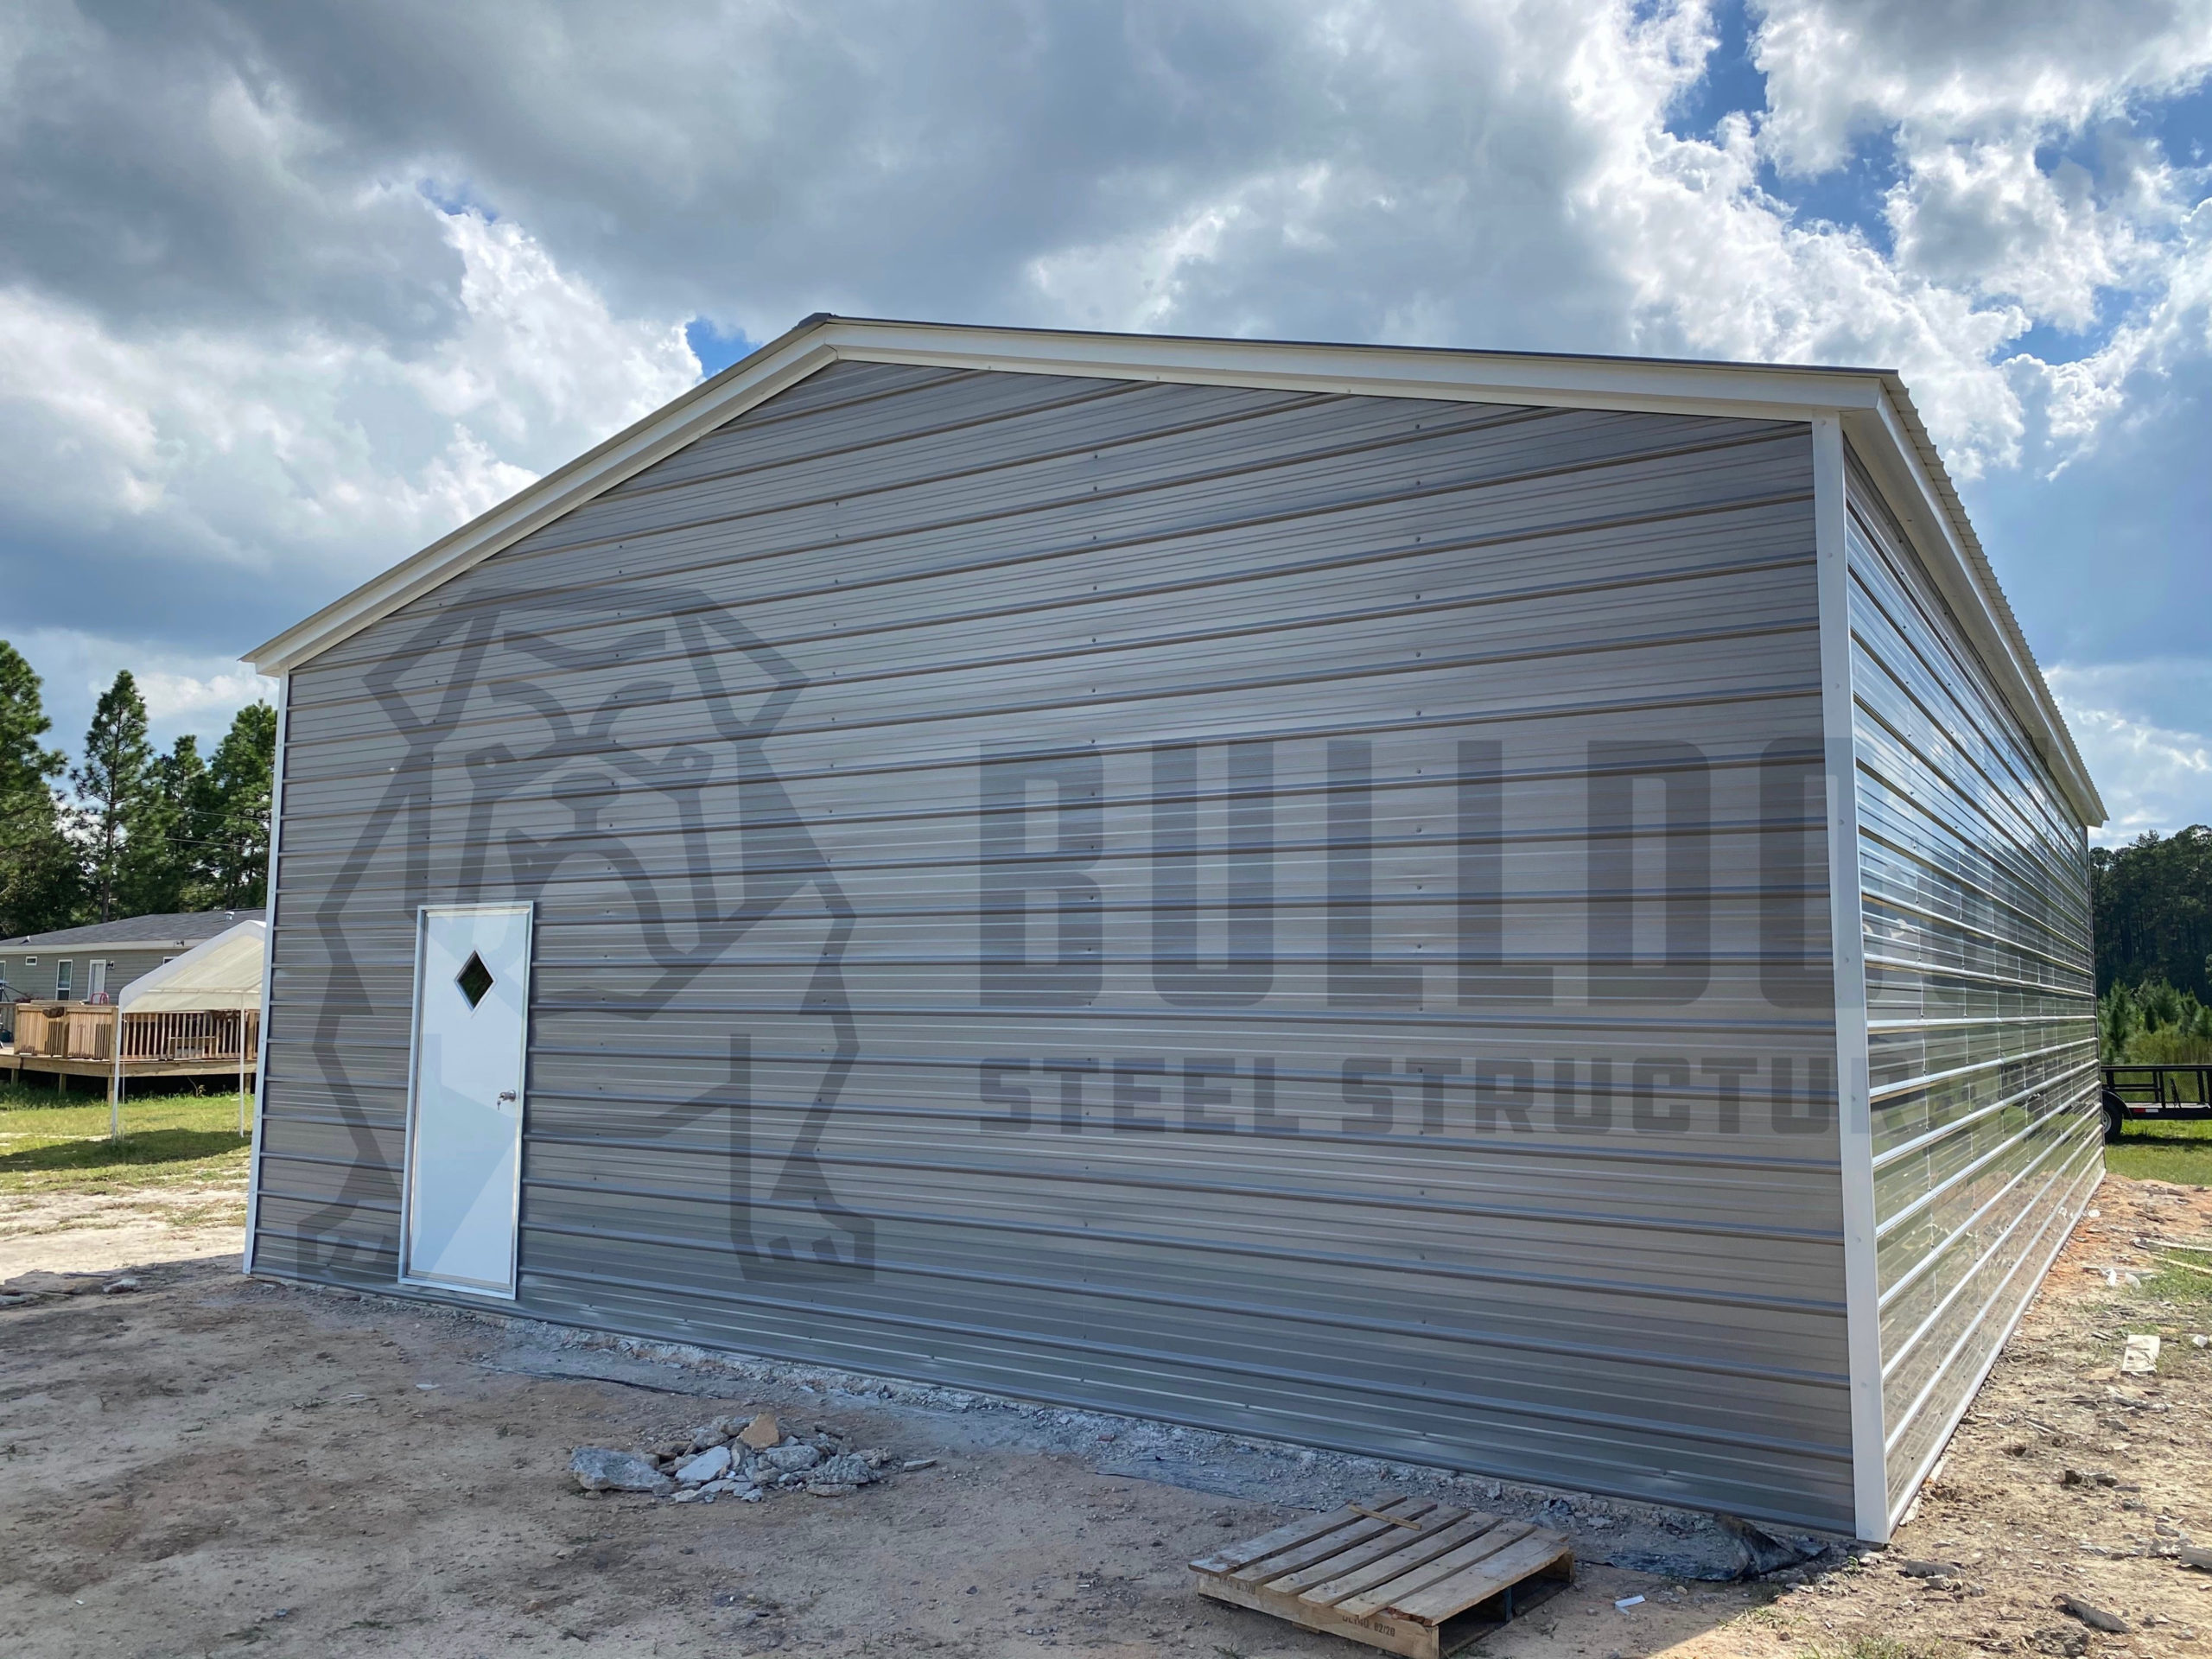 Exterior of metal shed